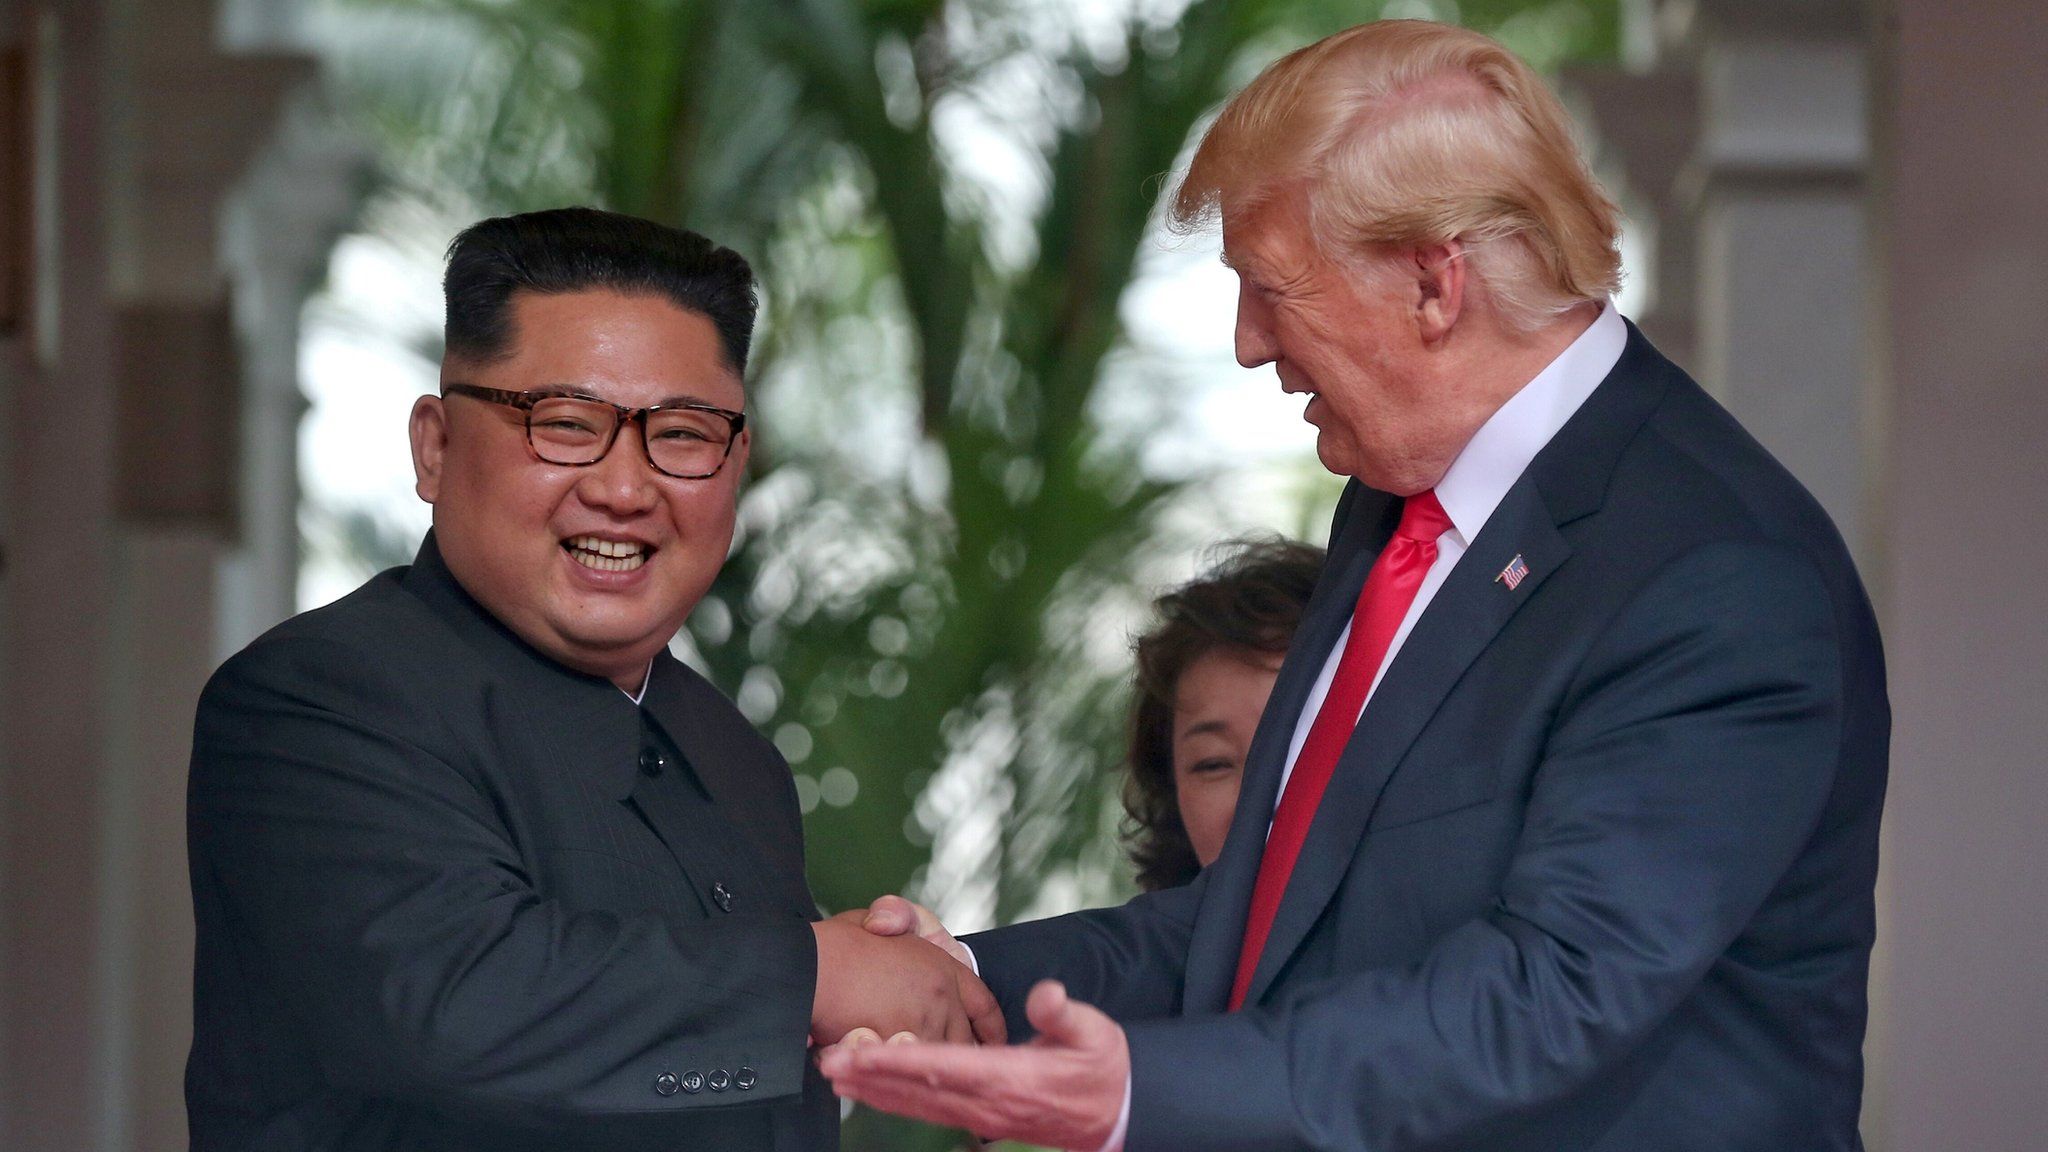 US President Donald Trump greets a smiling Kim Jong-un at the Capella Hotel on Sentosa island in Singapore